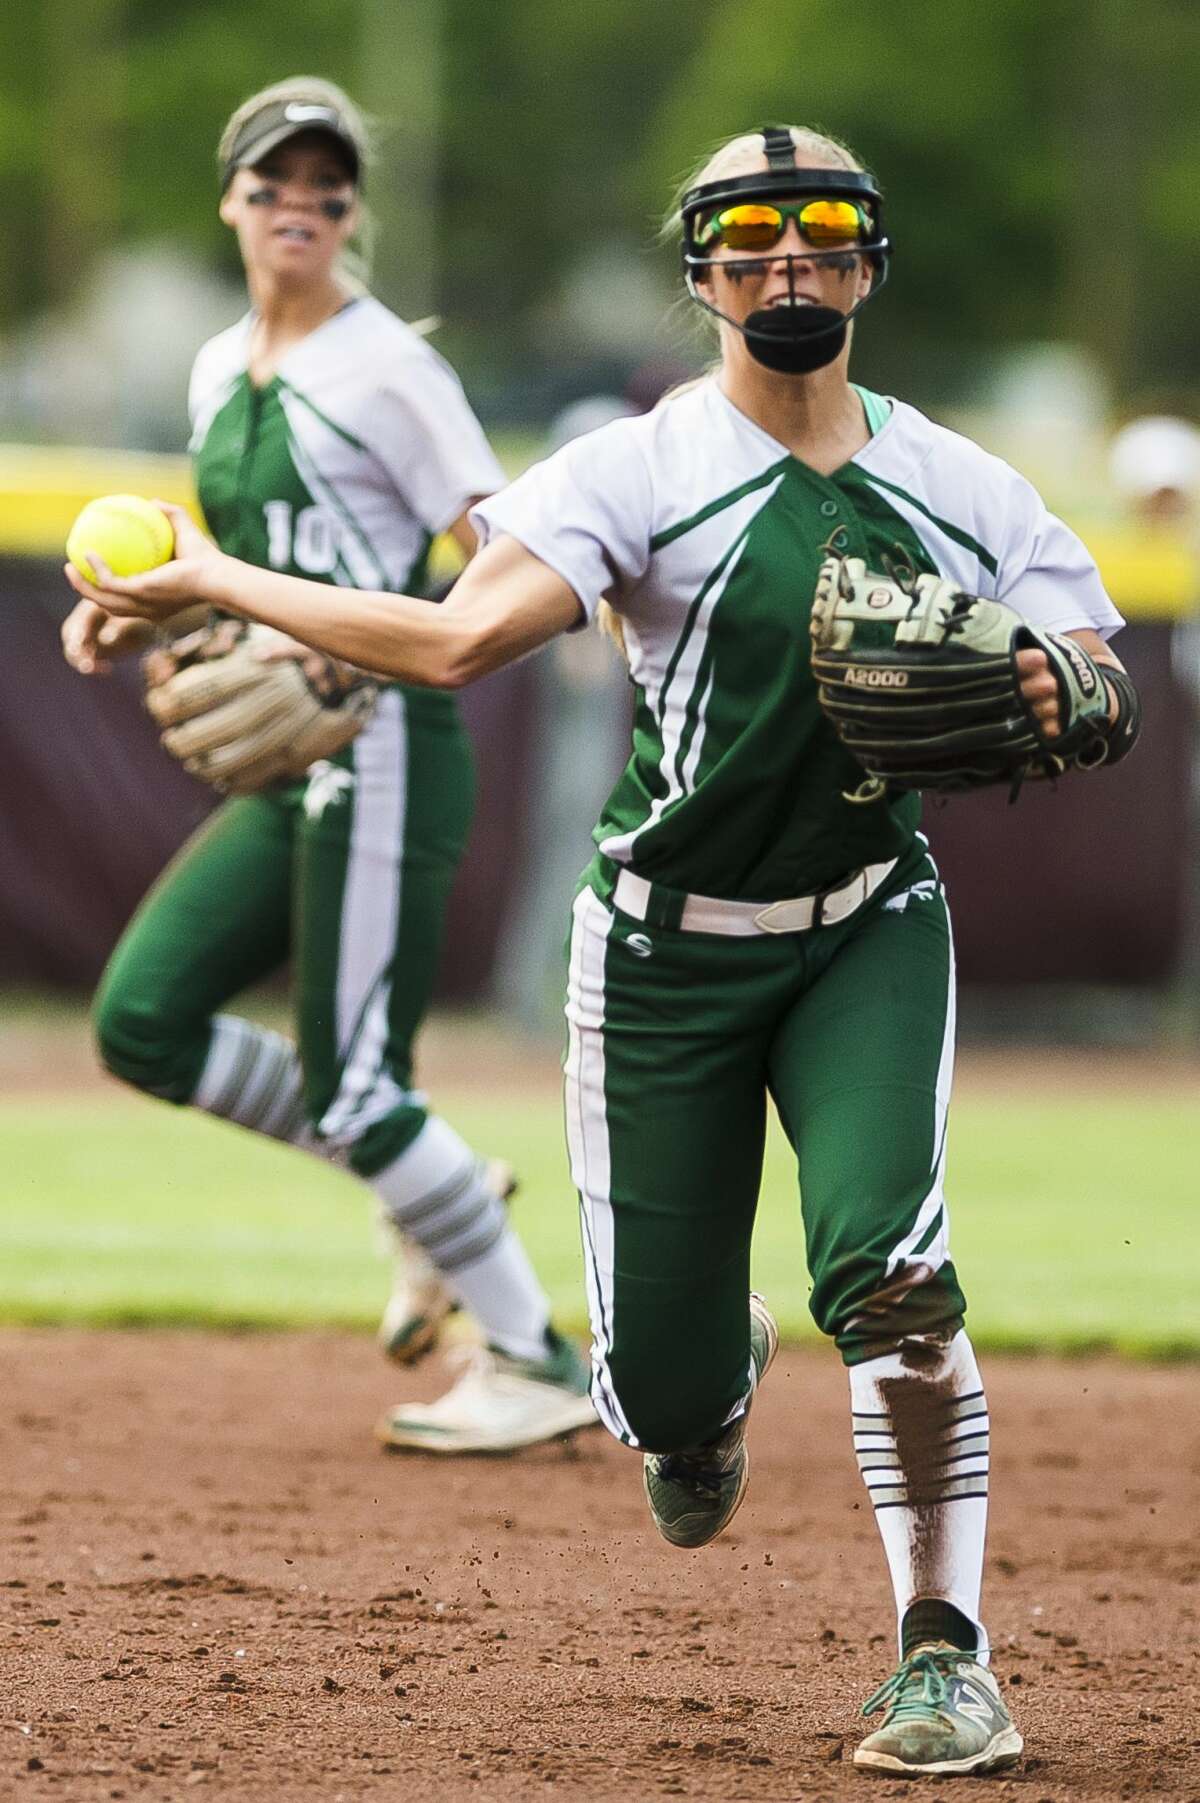 Freeland's Camryn Coonan throws the ball to first base during the Falcons' Division 2 state quarterfinals loss to Escanaba on Tuesday, June 11, 2019 at Central Michigan University. (Katy Kildee/kkildee@mdn.net)